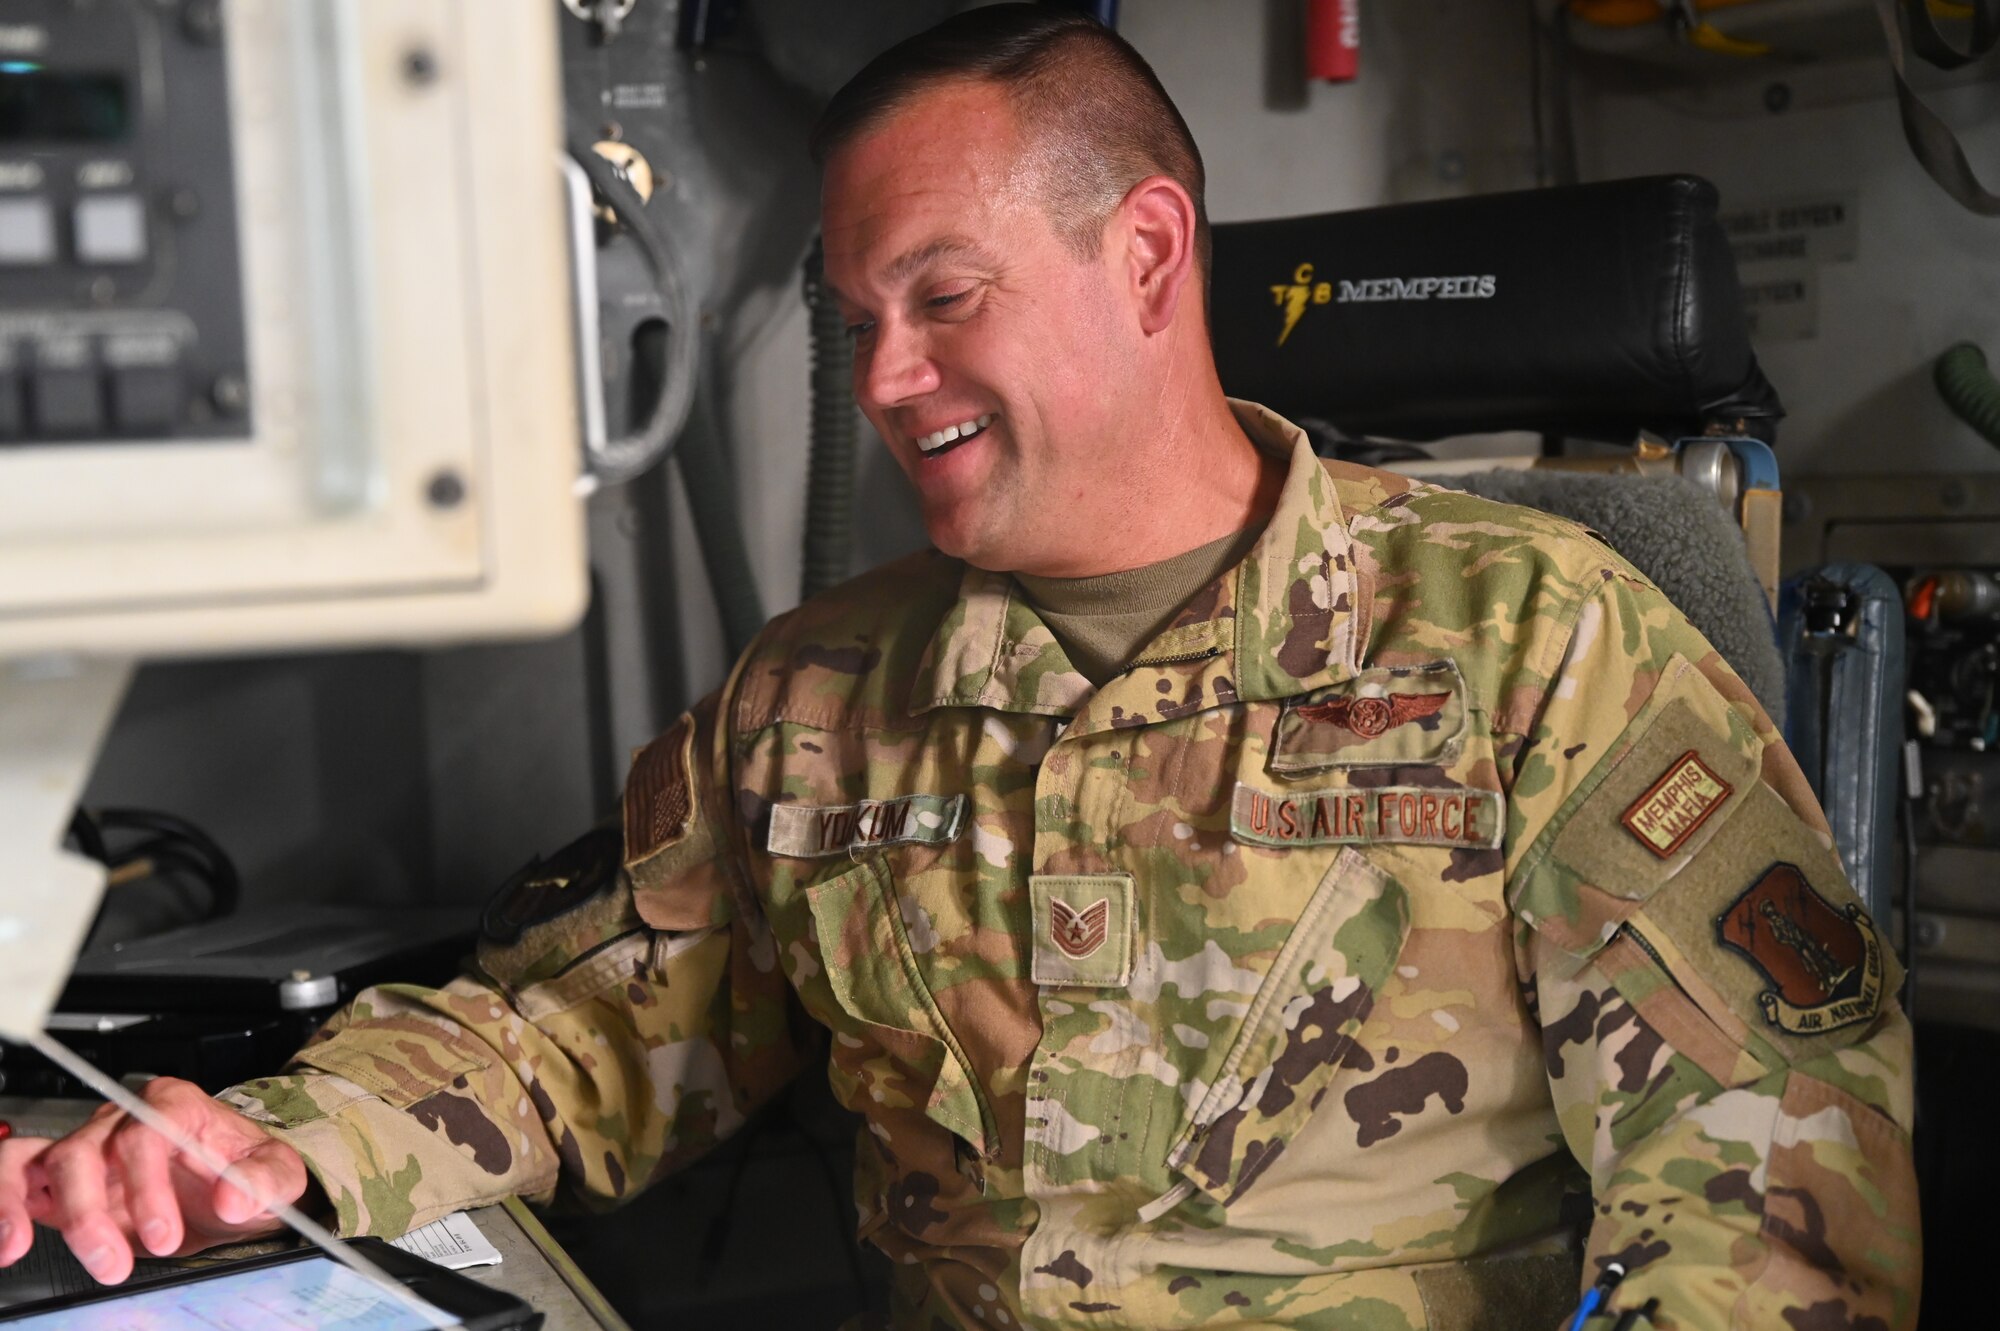 Tech Sgt Brett Yoakum , a loadmaster with the 155th Airlift Squadron, demonstrates different duties of his job in a C-17 Globemaster III at the 164th Airlift Wing in Memphis, Tenn. May 15, 2022. Yoakum was recently awarded the Outstanding Airman of the Year Award for his hard work flying multiole missions wit the 164th Operations Group. 
(U.S. Air National Guard photo by Airman 1st Class TràVonna Hawkins)